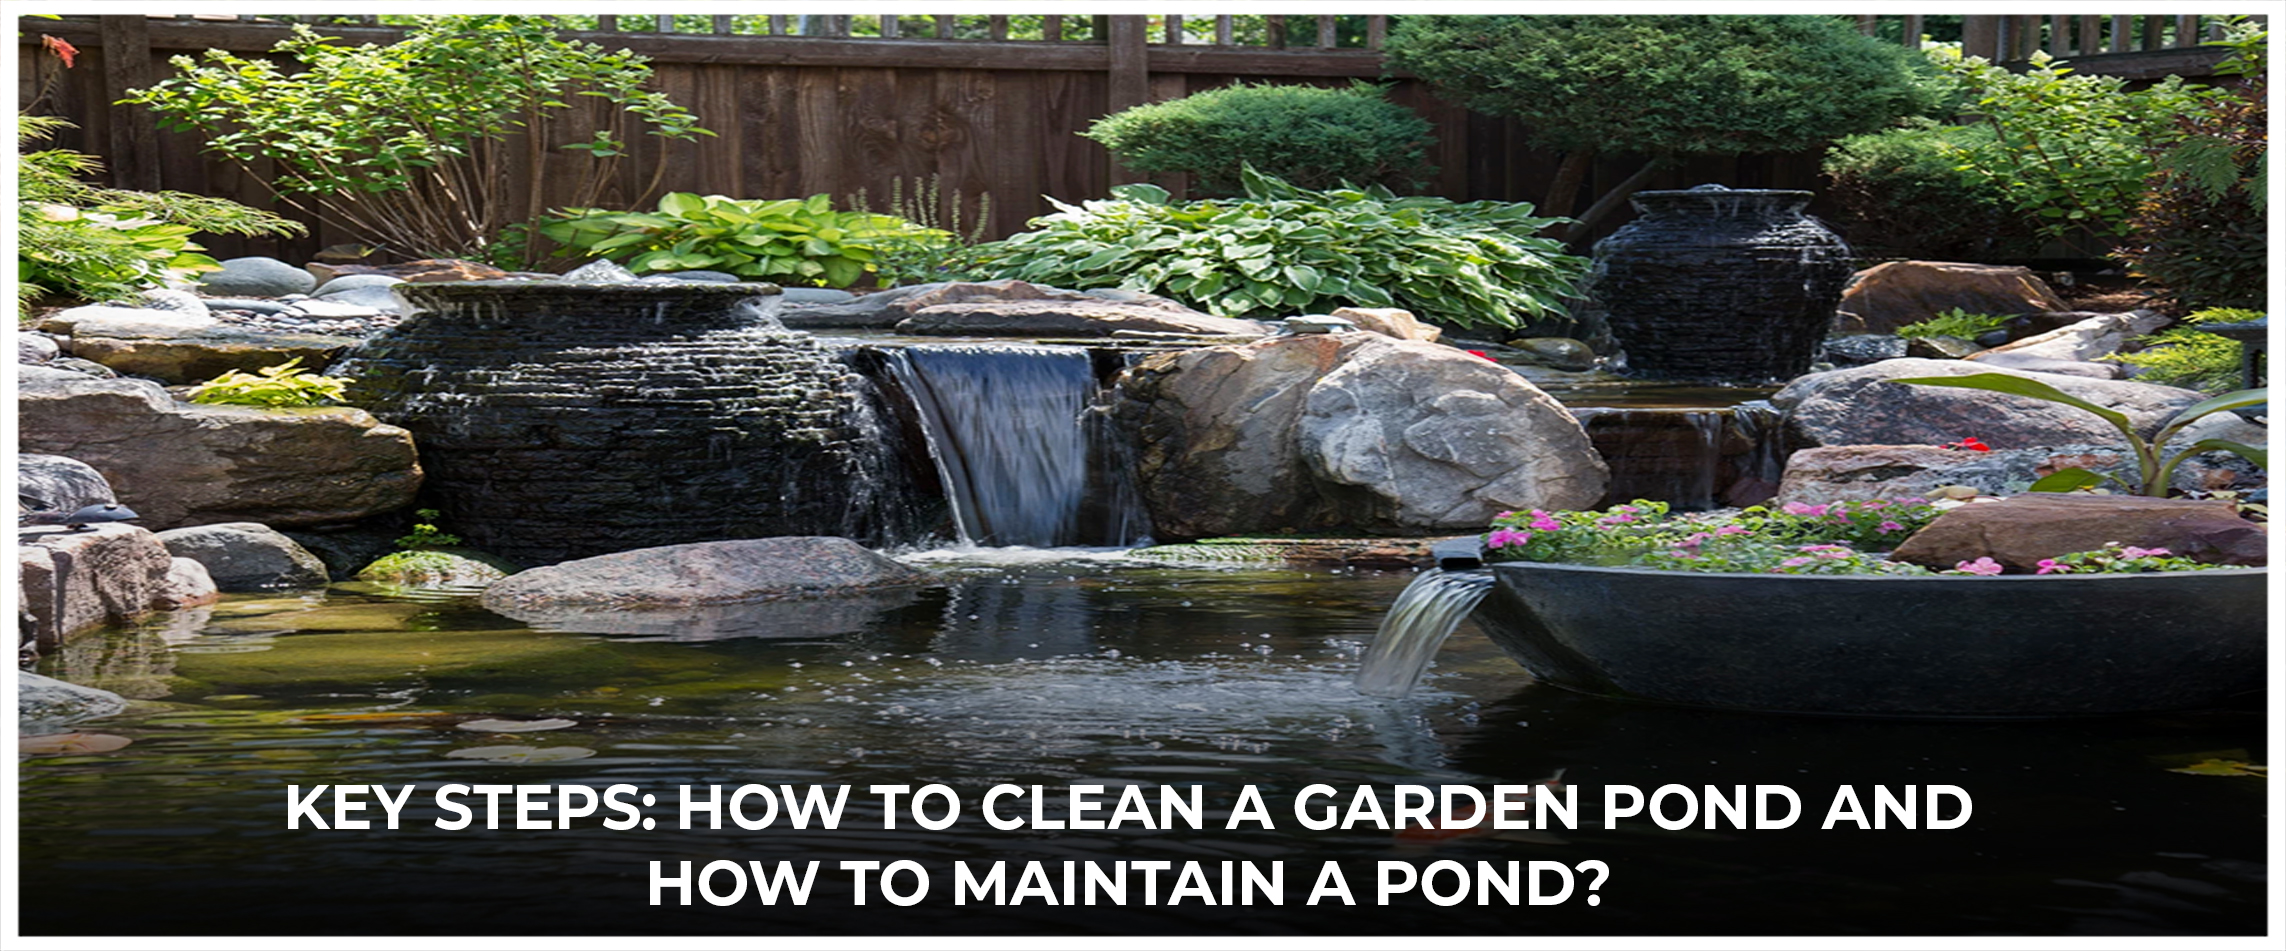  Key Steps How To Clean A Garden Pond and How to Maintain a Pond